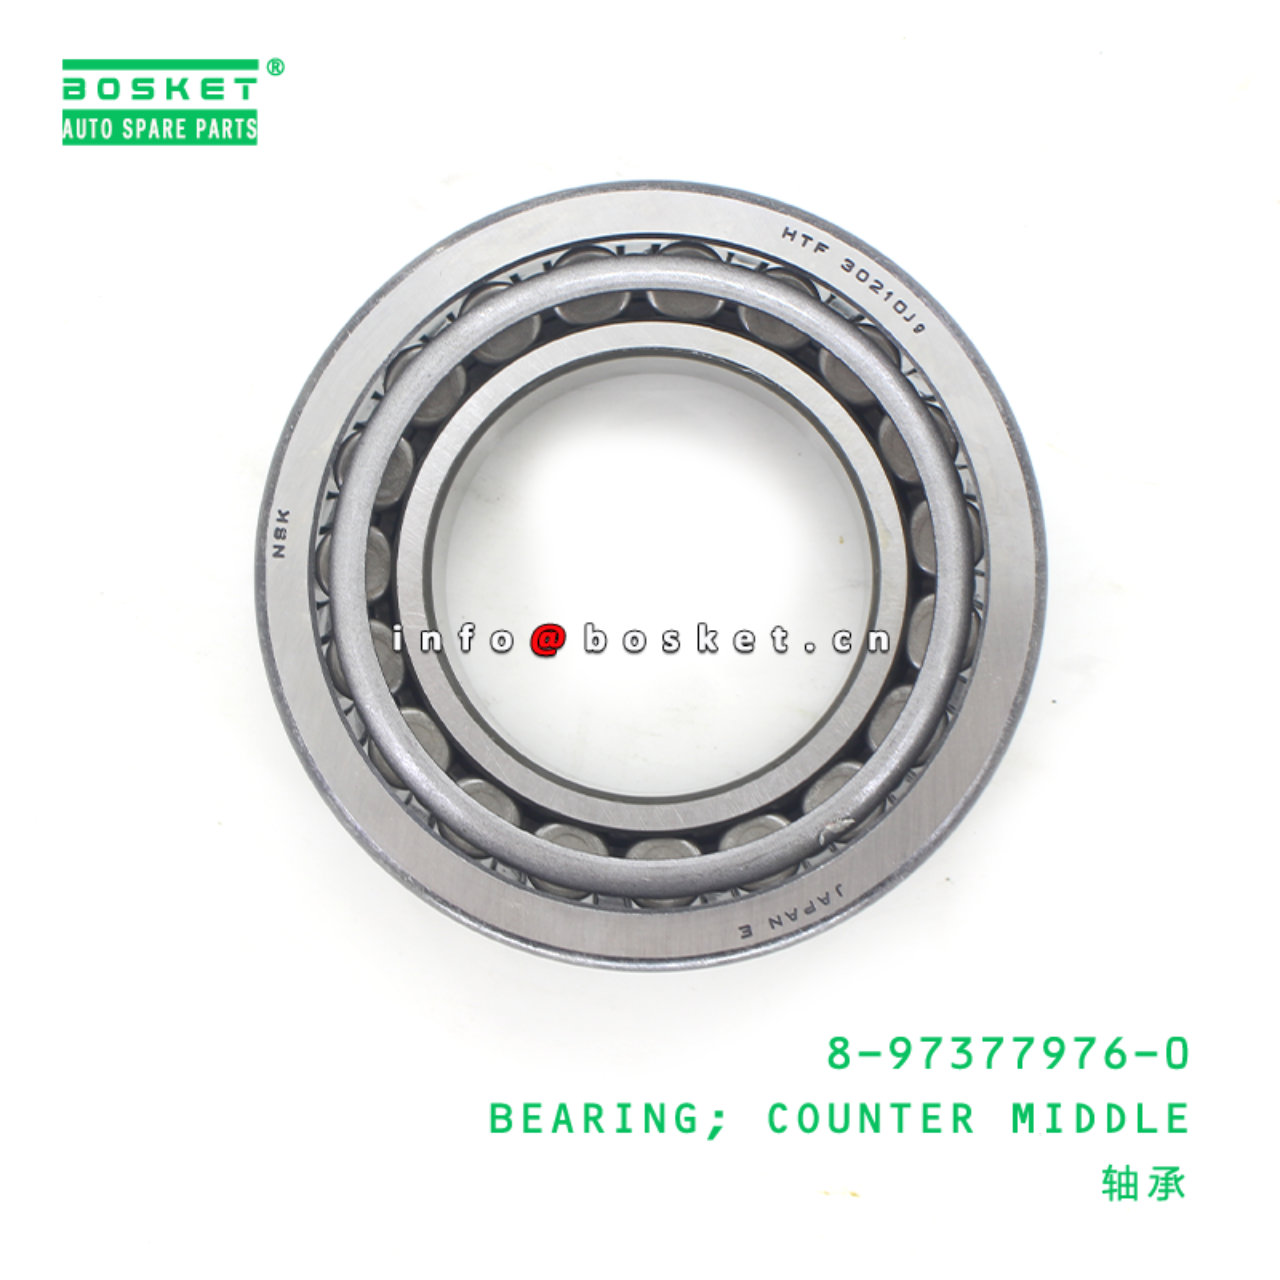 8-97377976-0 Counter Middle Bearing 8973779760 Suitable for ISUZU FRR FTR